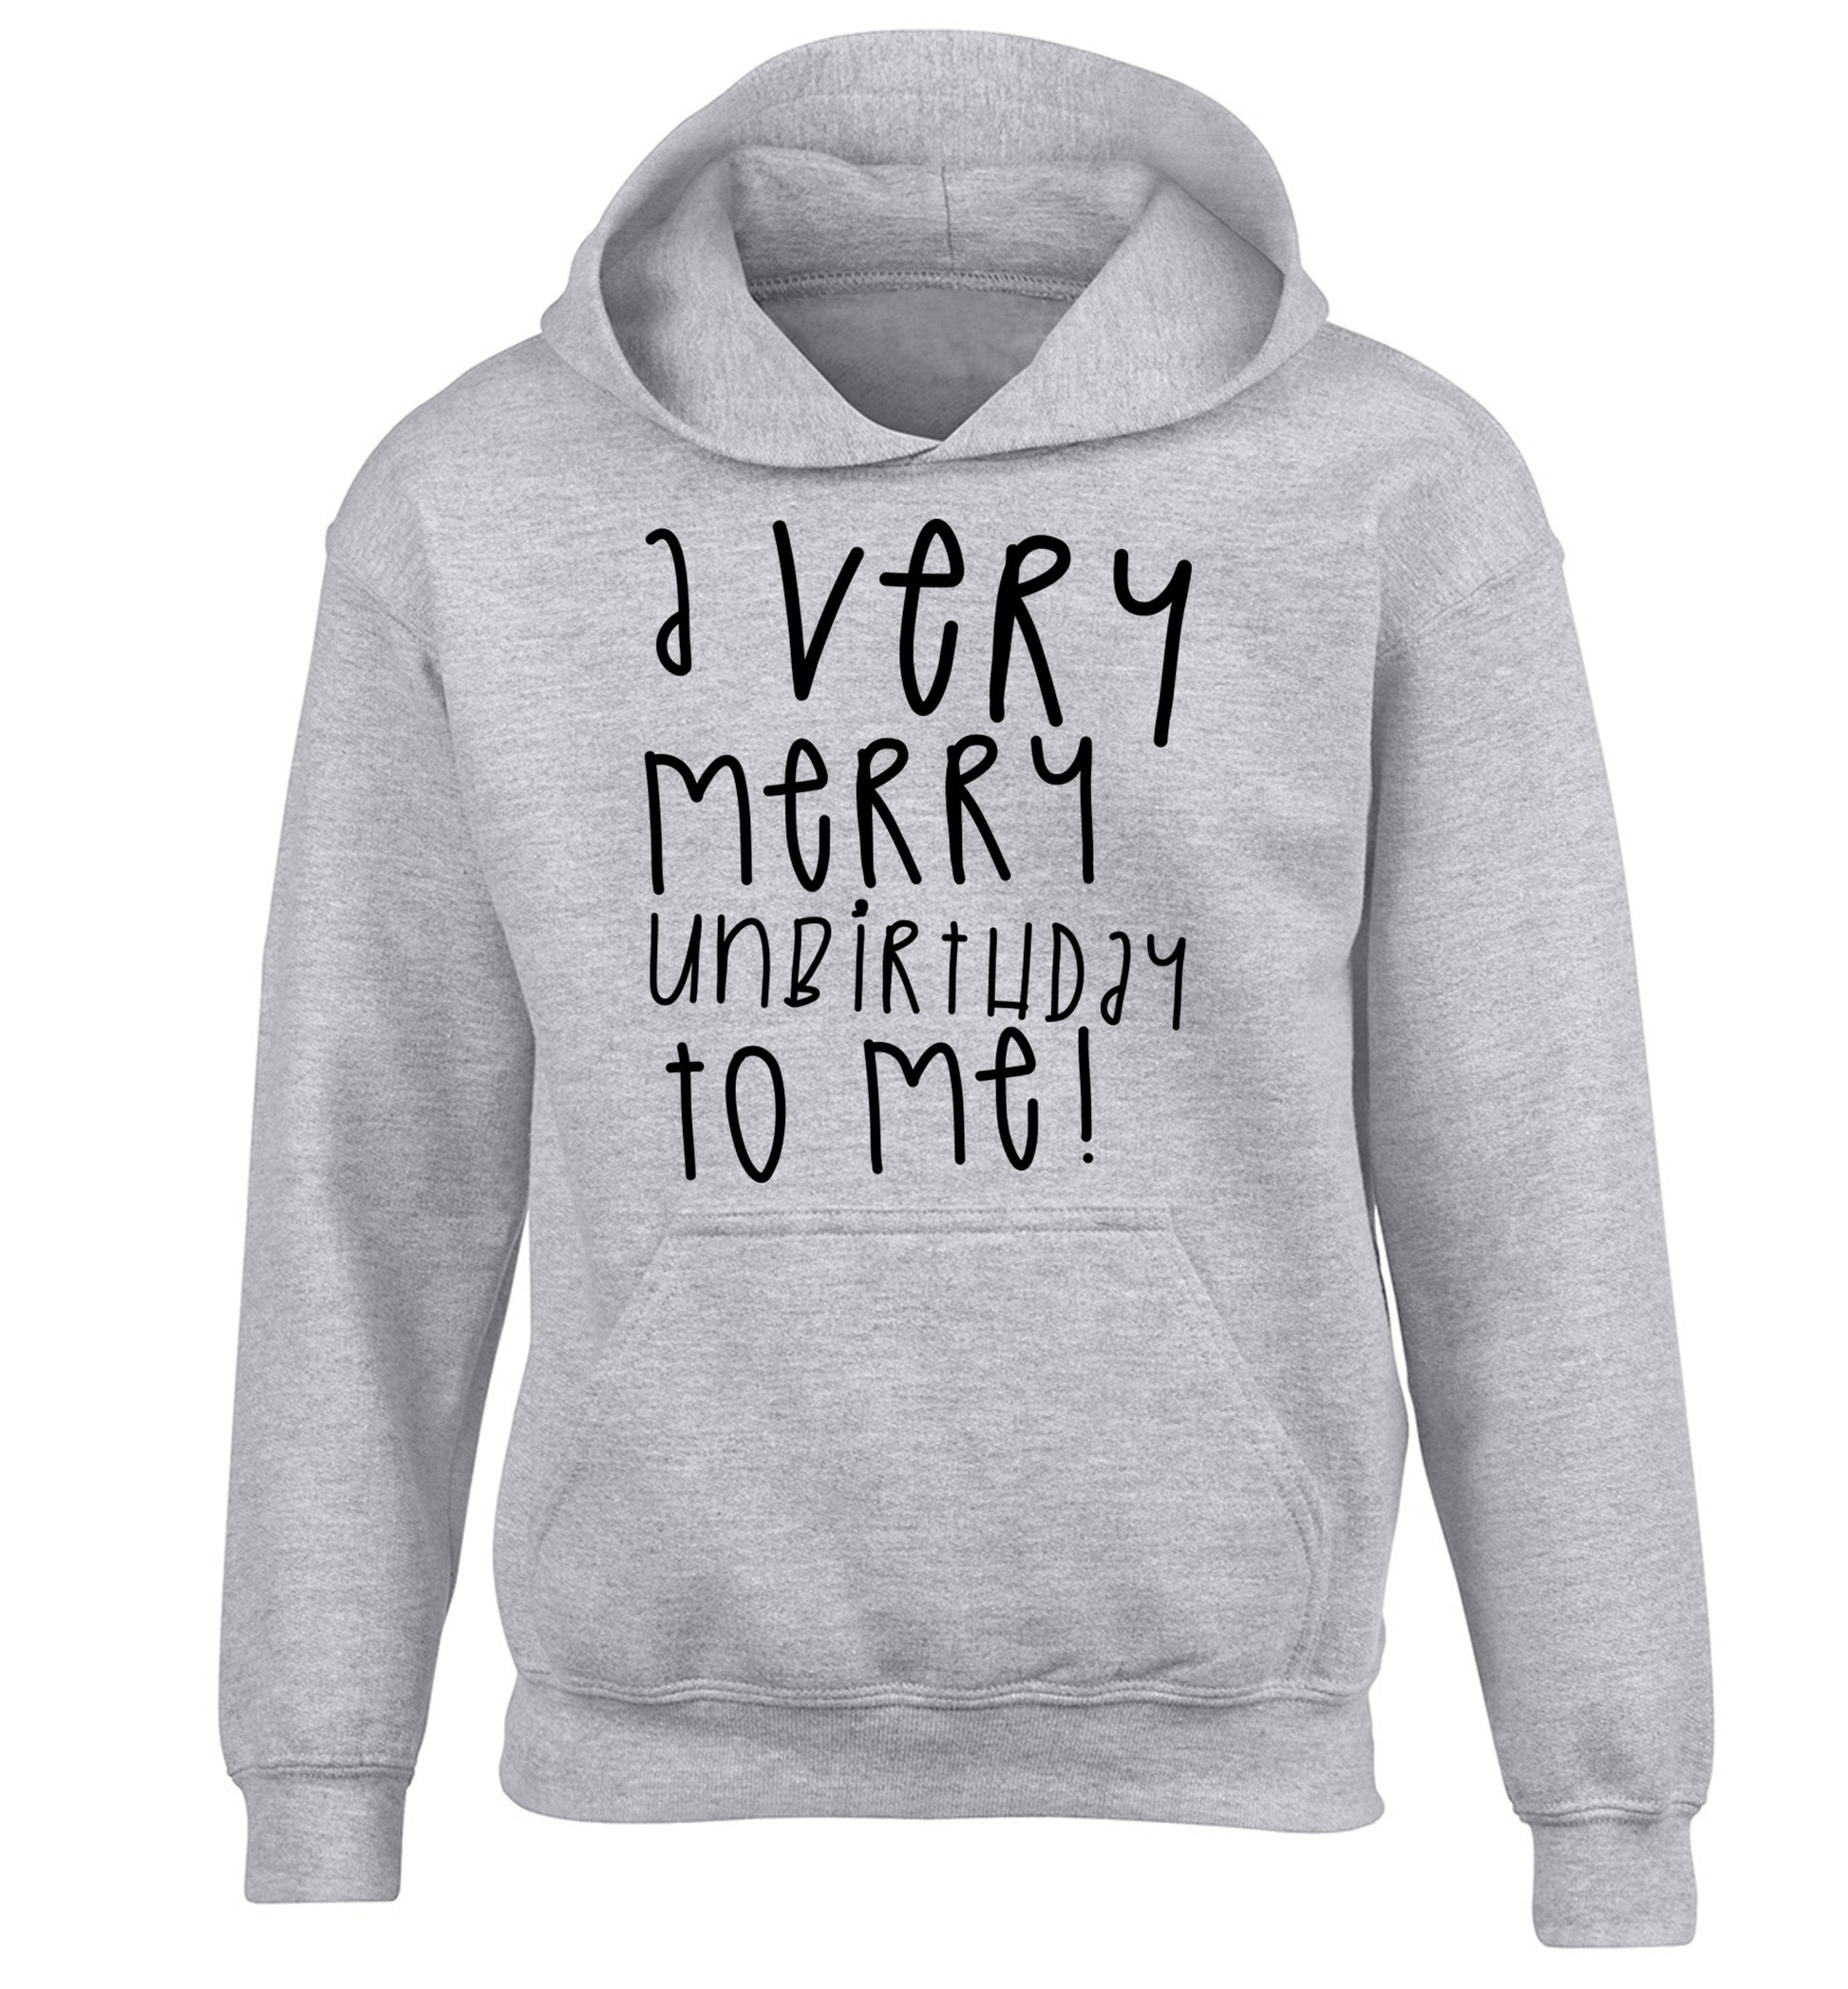 A very merry unbirthday to me! children's grey hoodie 12-14 Years